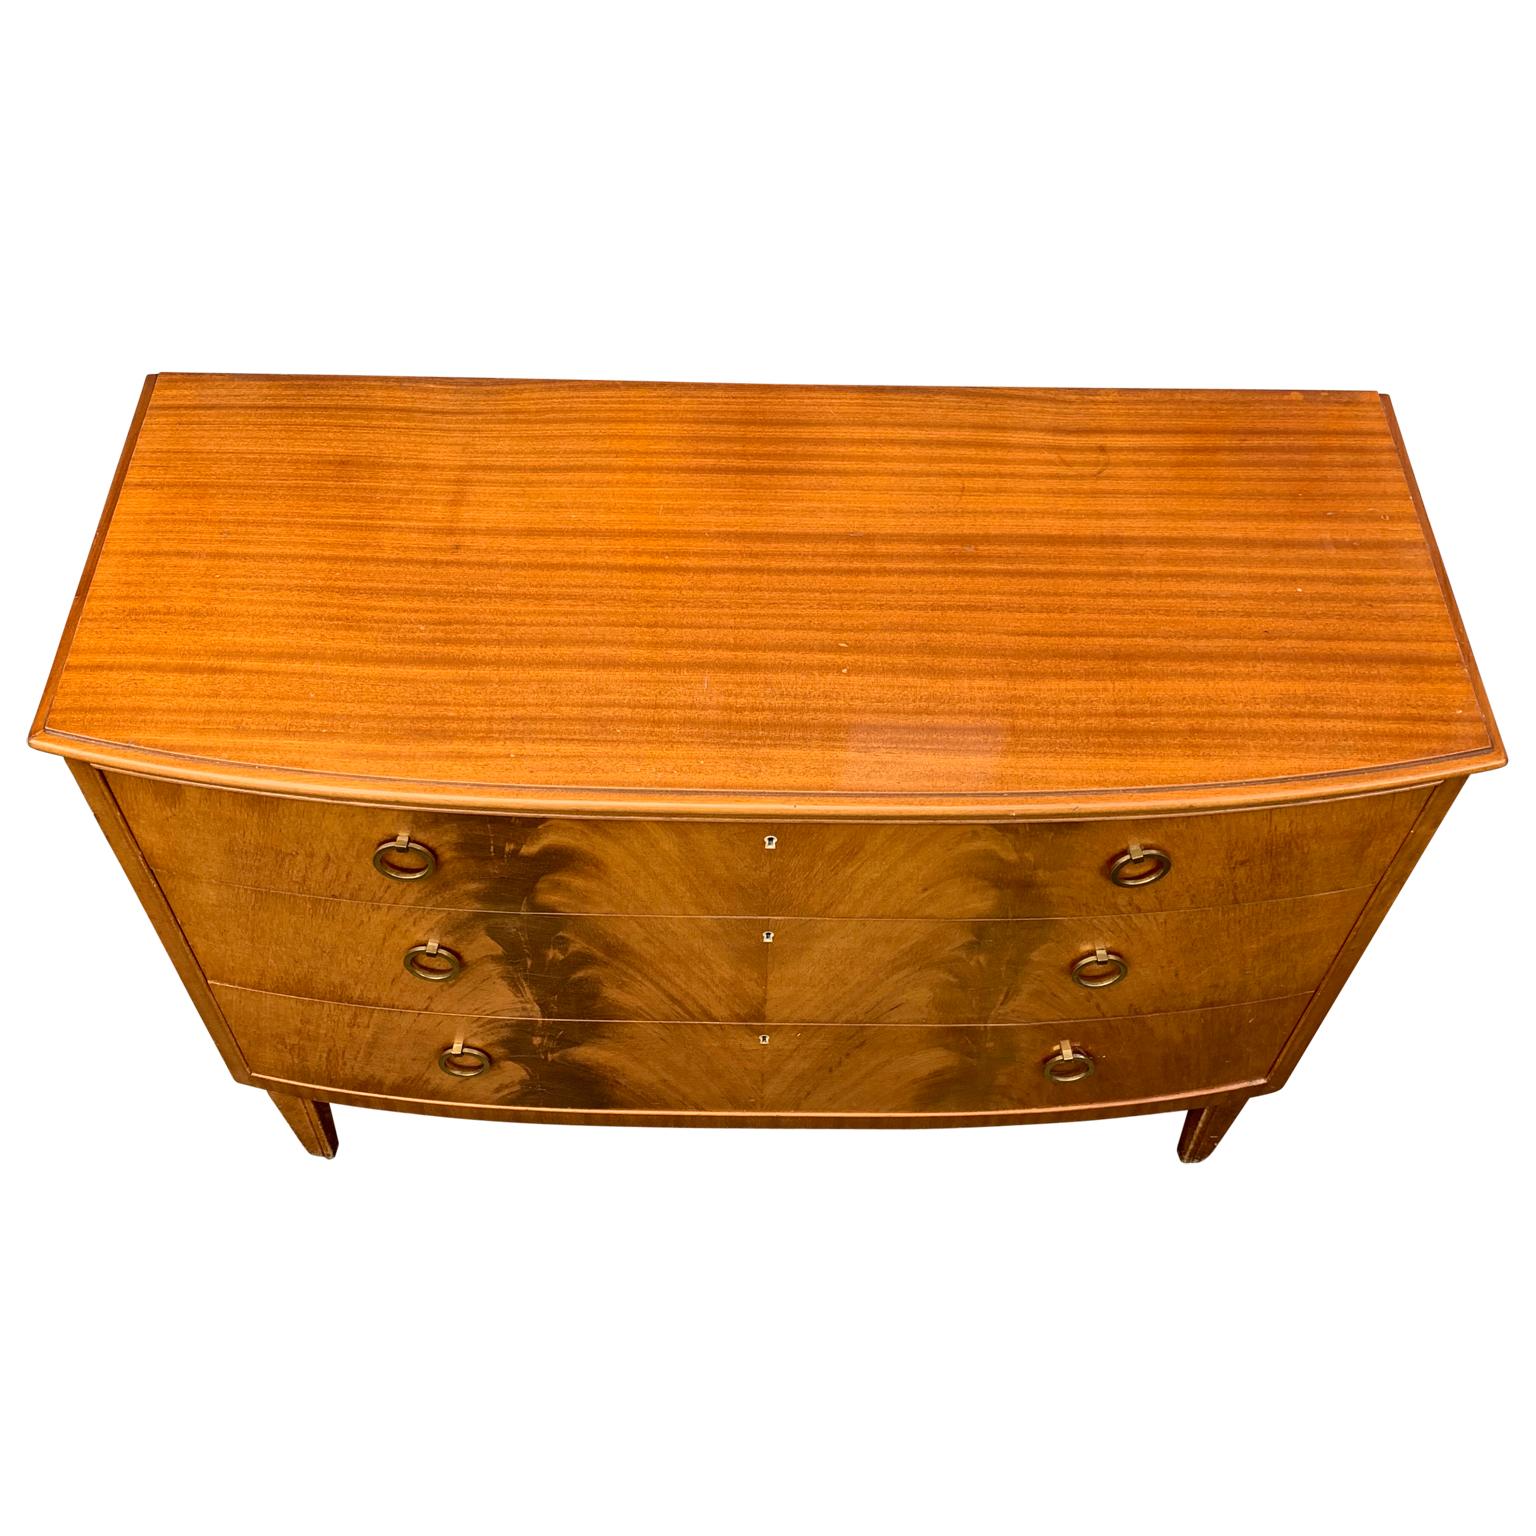 20th Century Swedish Midcentury 3-Drawer Chest with Light Mahogany Veneer and Curved Front